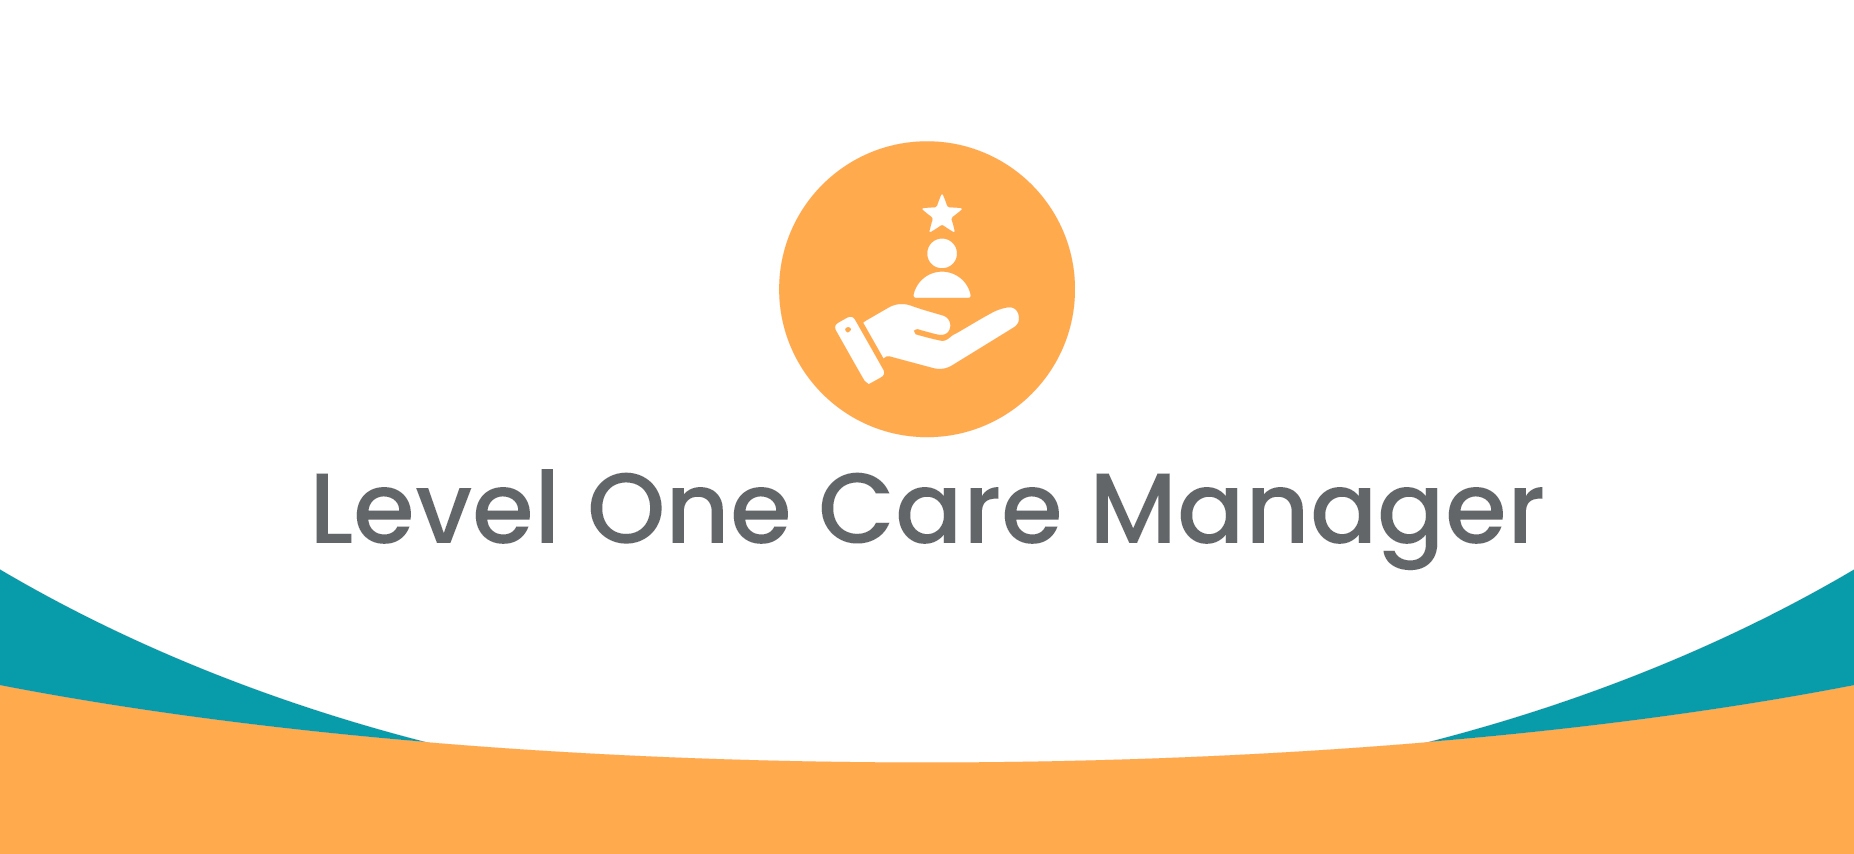 Level One Care Manager